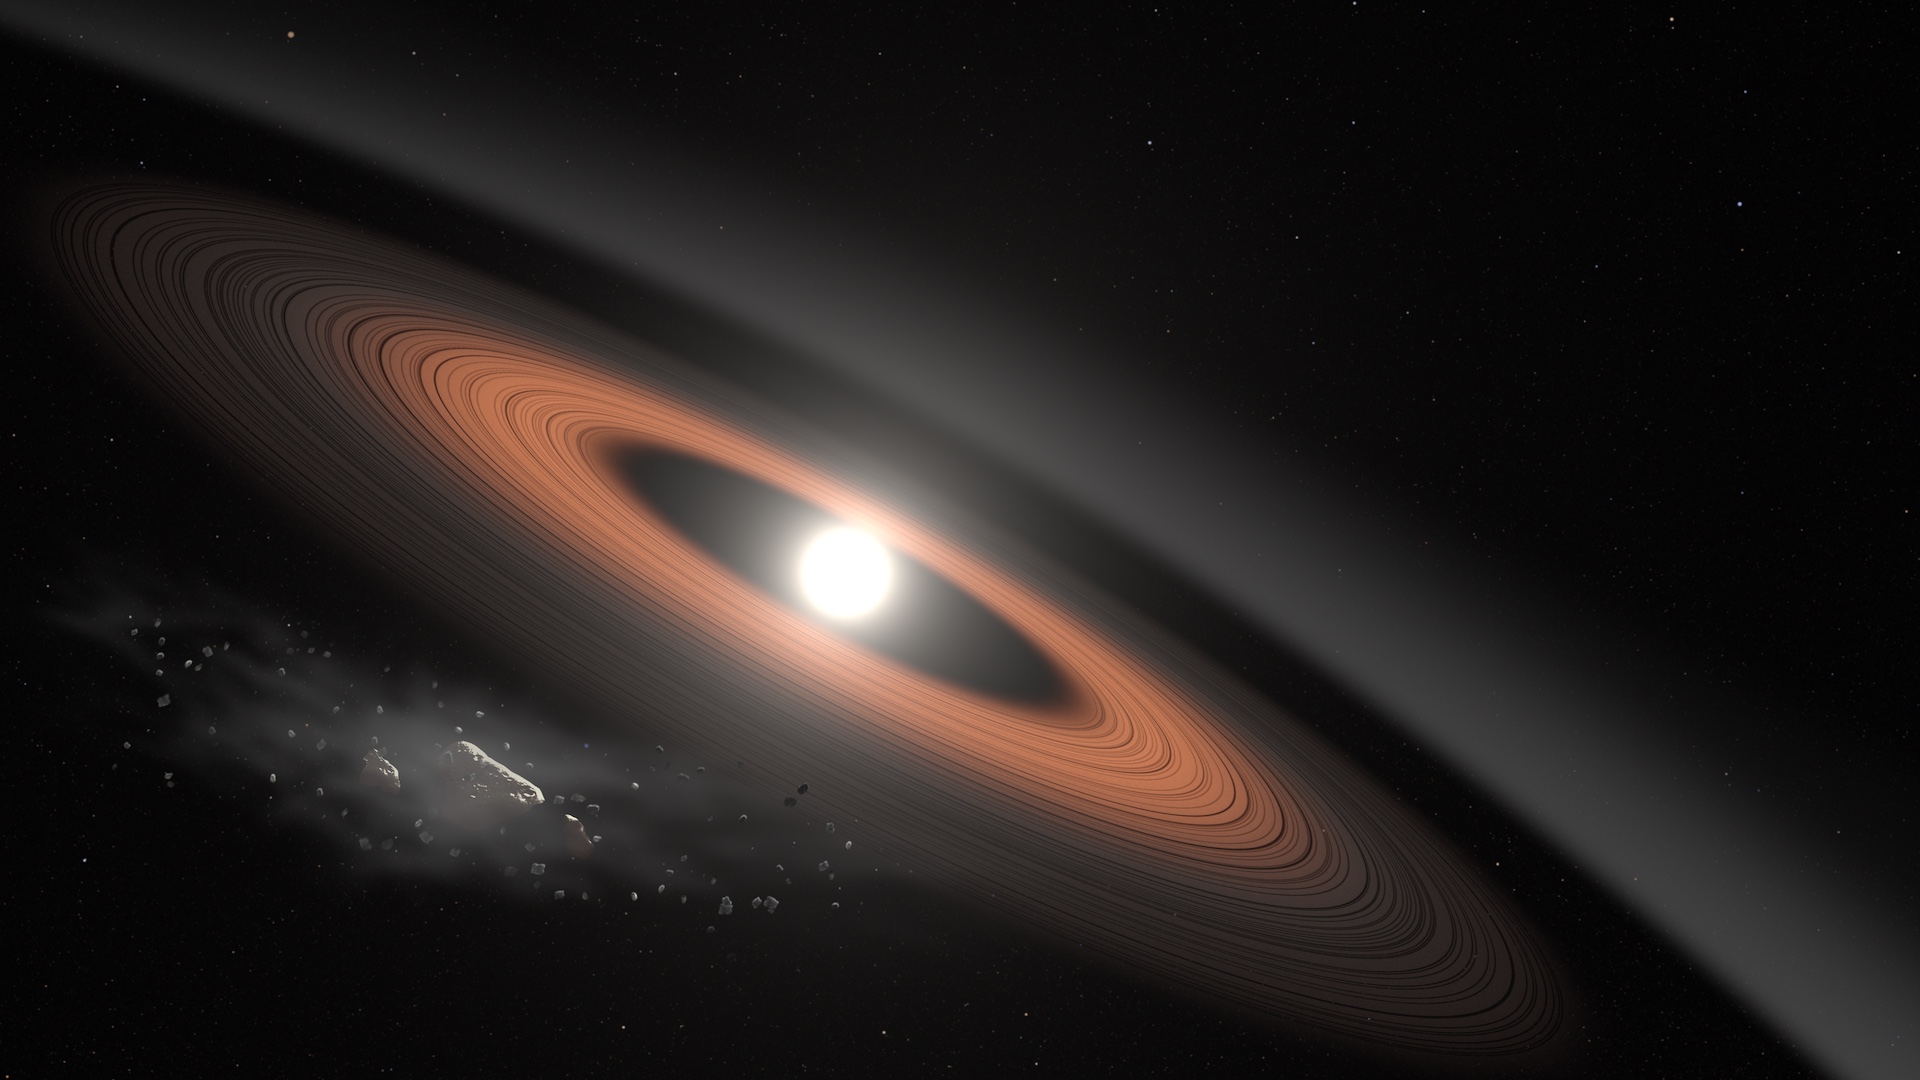 In this illustration, an asteroid (bottom left) breaks apart under the powerful gravity of LSPM J0207+3331, the oldest, coldest white dwarf known to be surrounded by a ring of dusty debris. Scientists think the system’s infrared signal is best explained by two distinct rings composed of dust supplied by crumbling asteroids.
Credit: NASA’s Goddard Space Flight Center/Scott Wiessinger
